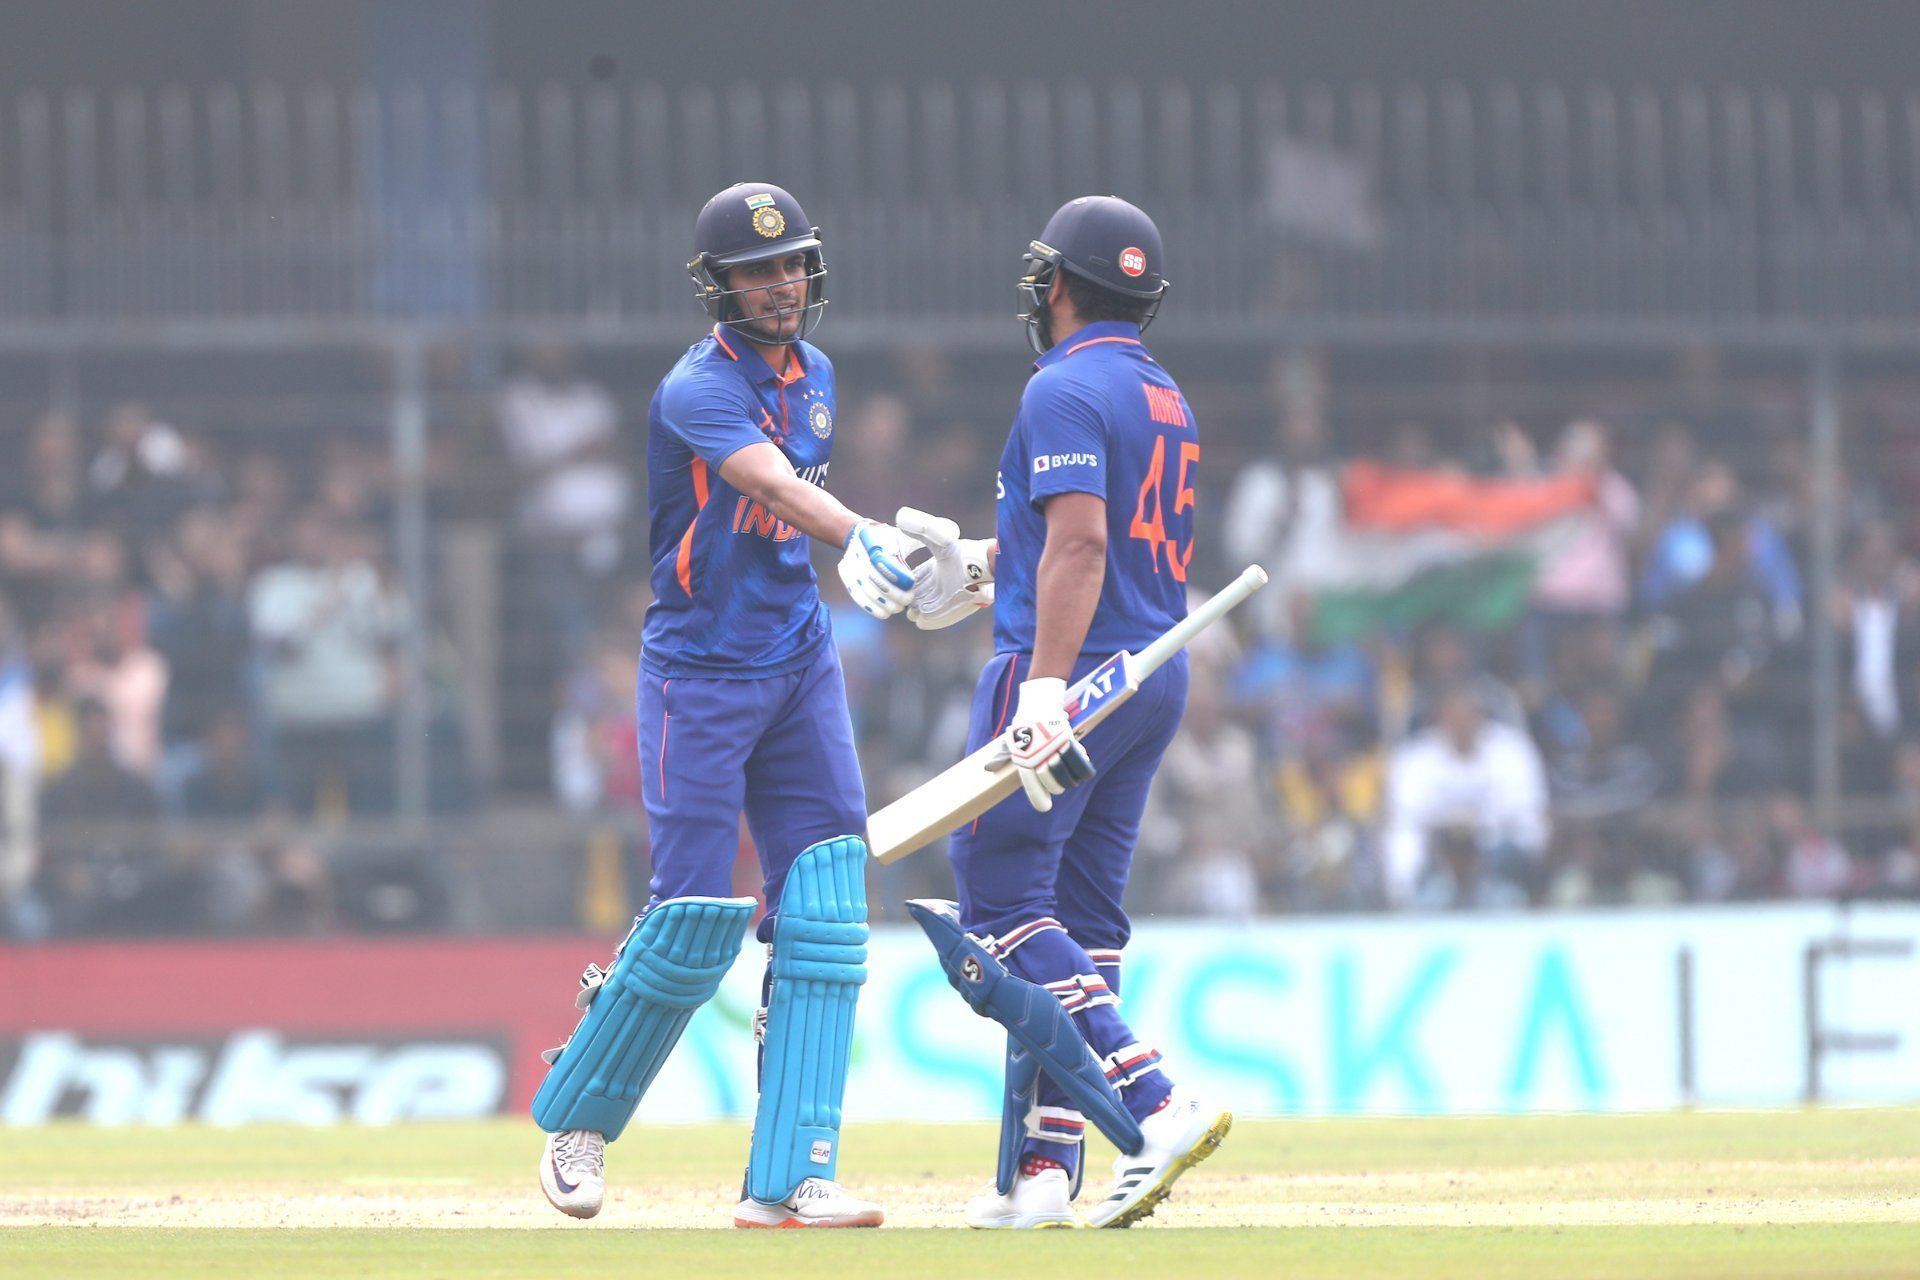 Rohit Sharma and Shubman Gill stitched a 200+ run partnership on Tuesday [Pic Credit: BCCI]